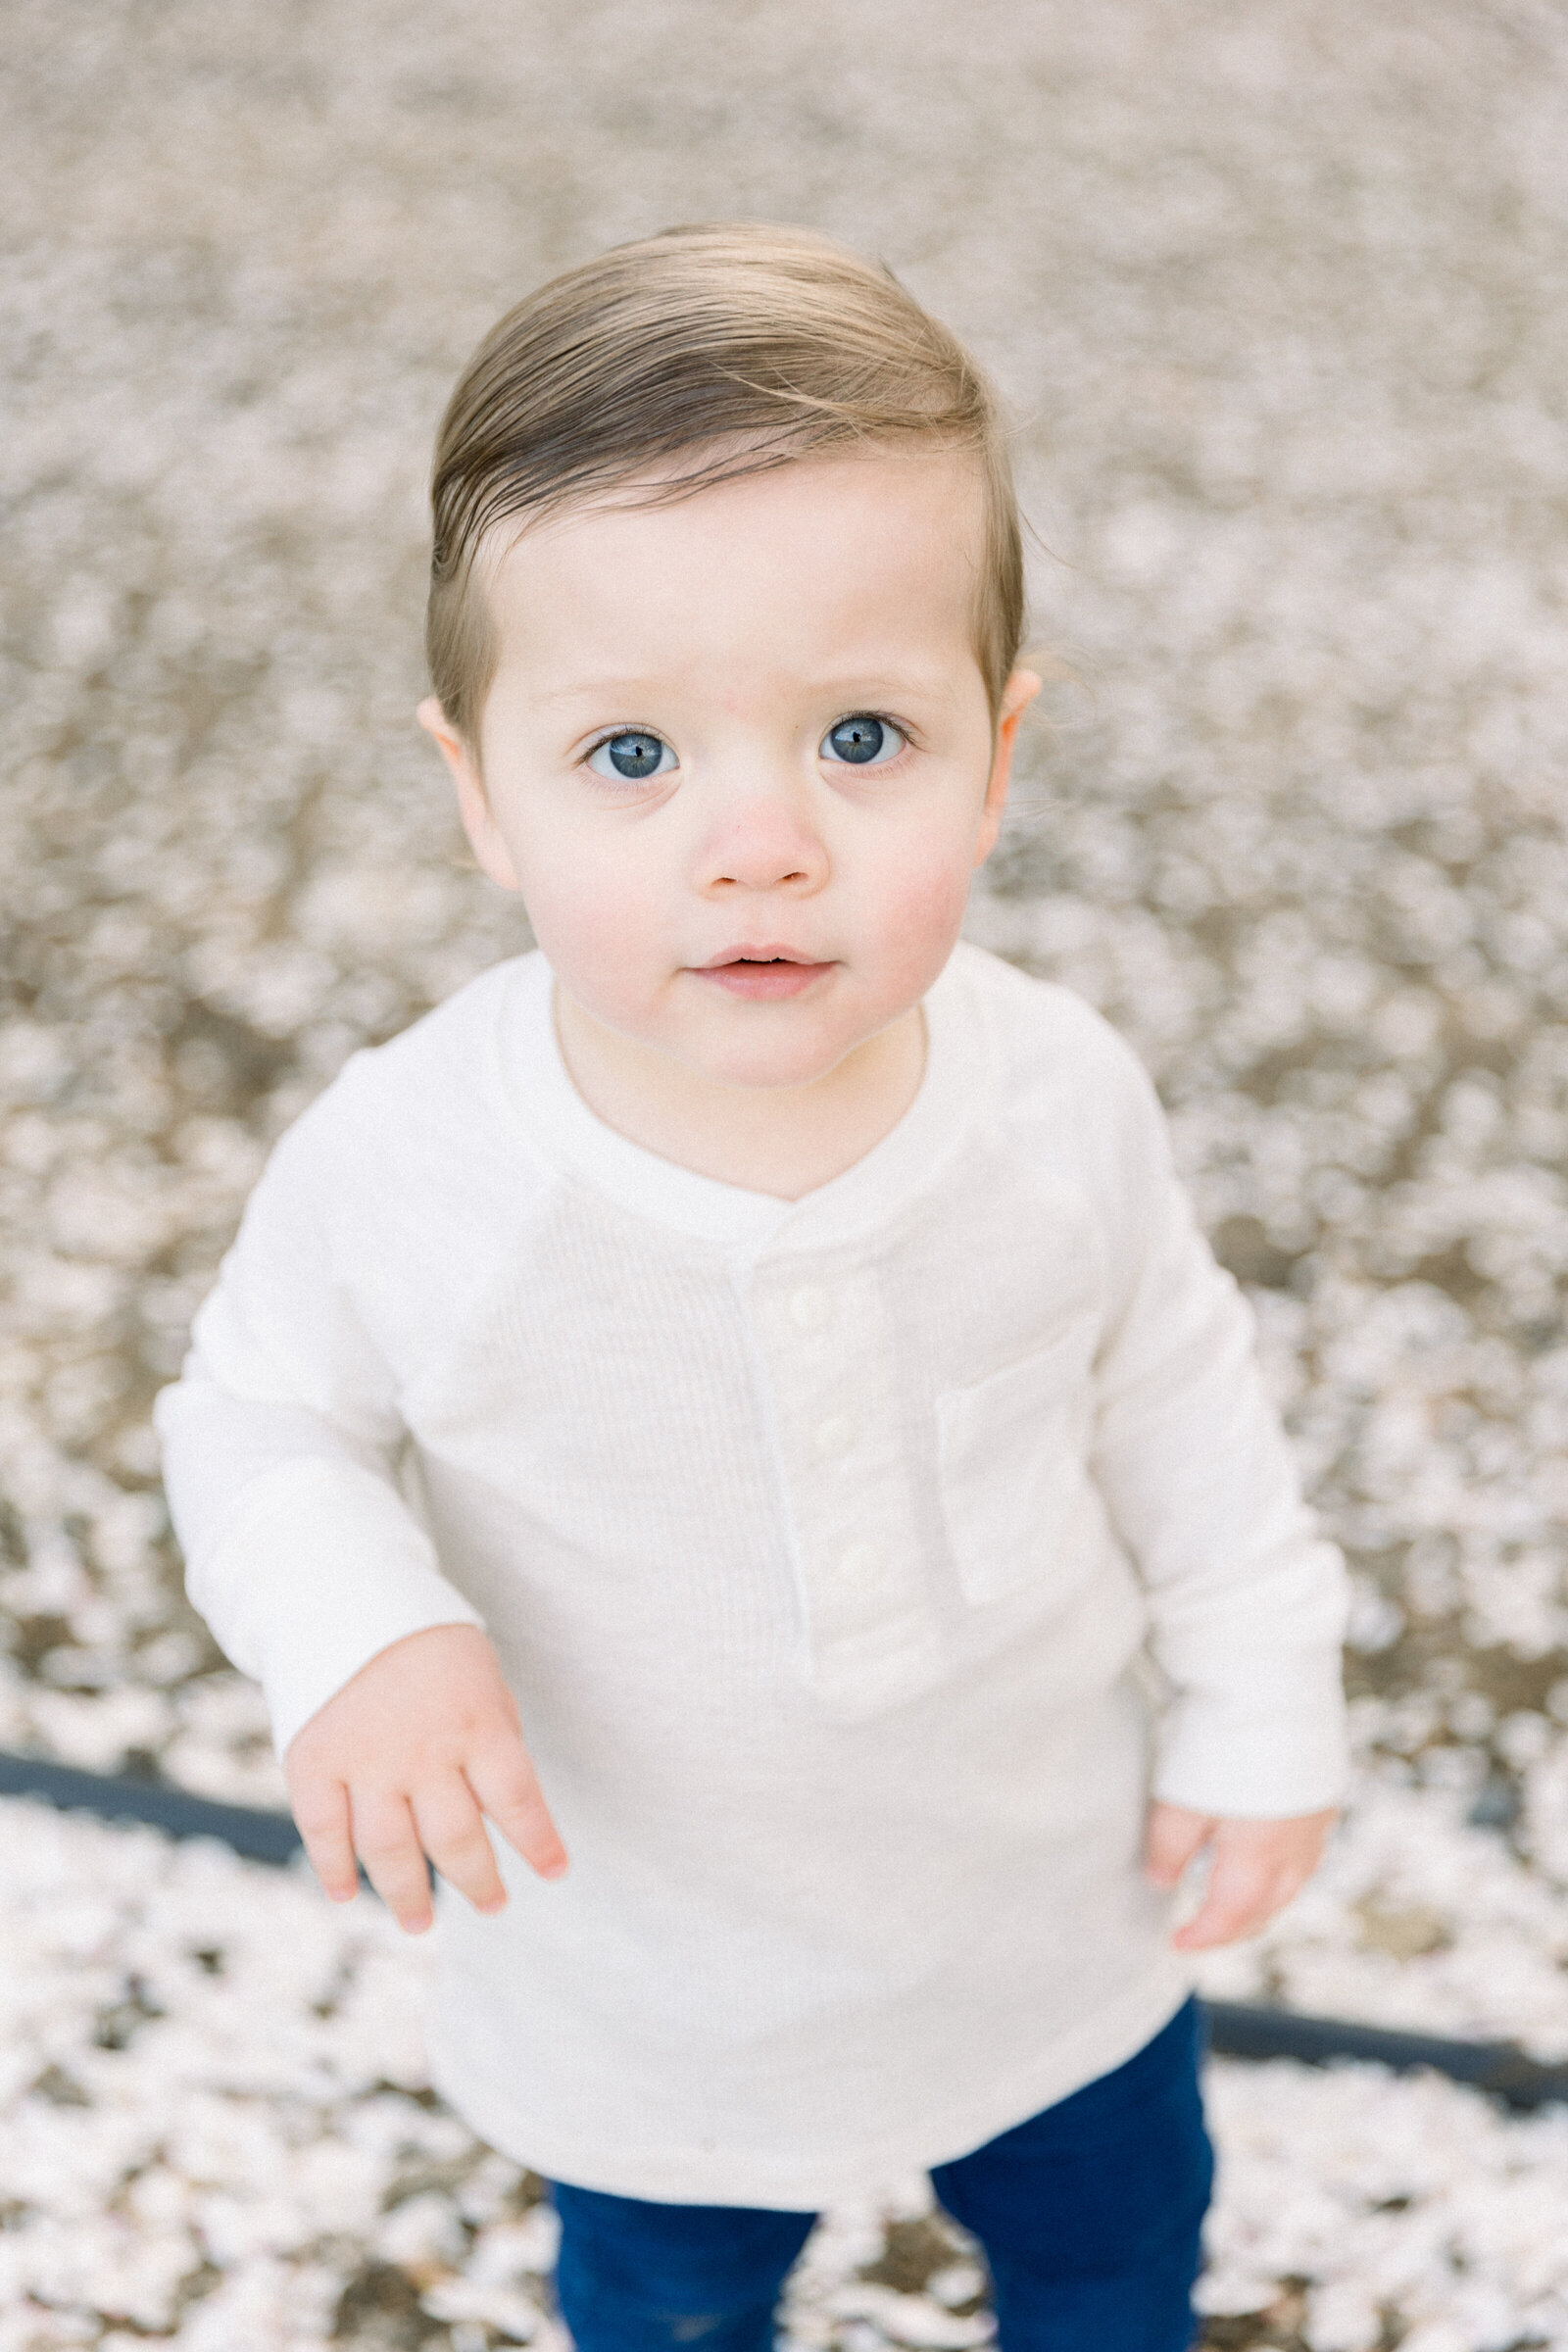 Image of young toddler boy in white shirt standing in almond blossom petals taken by Sacramento Newborn Photographer Kelsey Krall